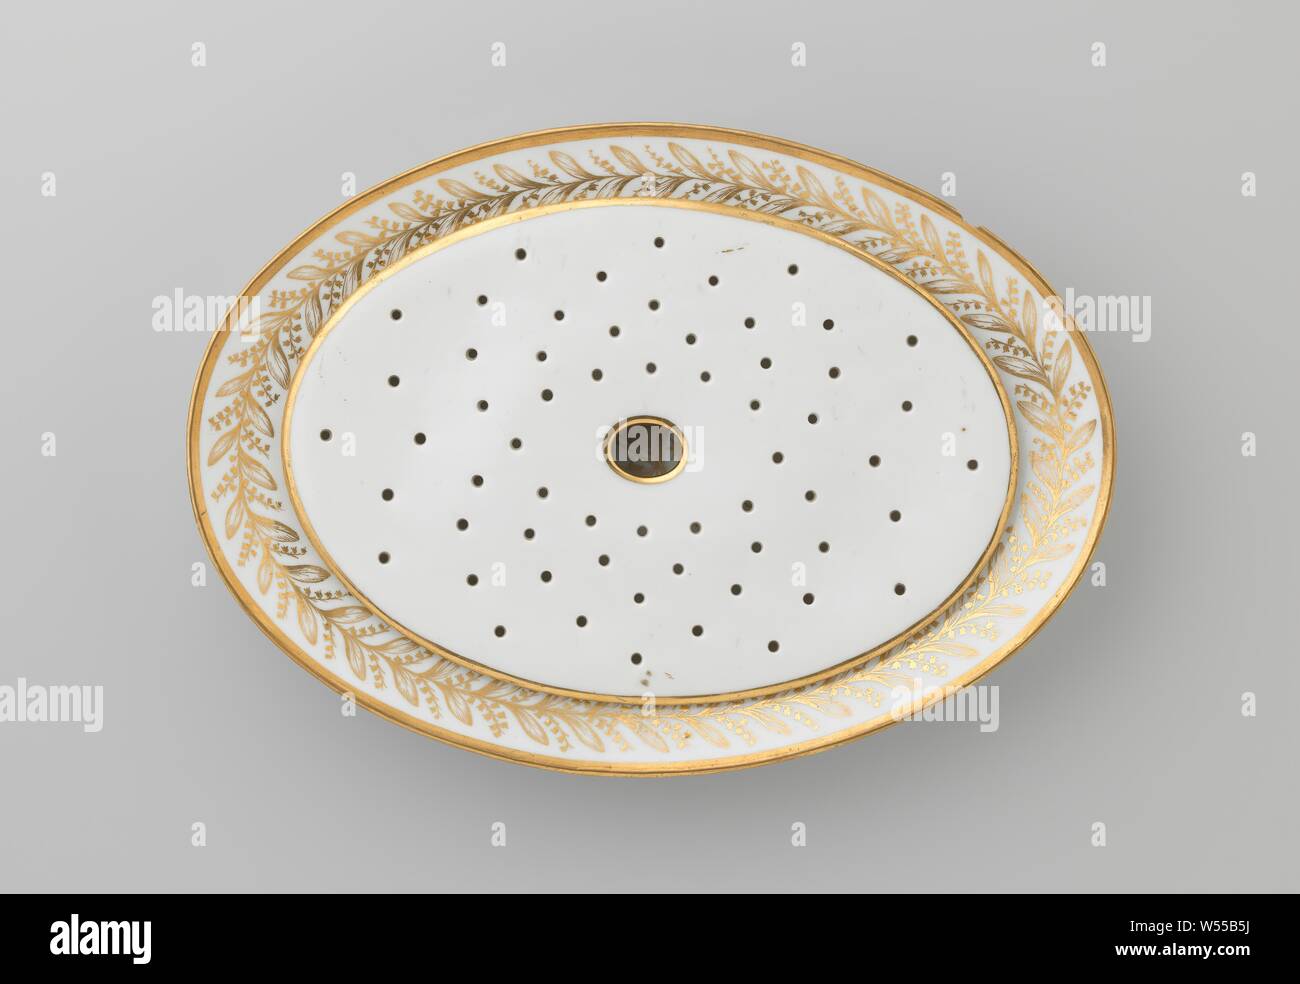 Dish with the coat of arms of Hendrik Peter Godfried Quack and Isabella Gertraud von Carnap, Oval dish (fish dish) with porcelain drip plate, painted on the glaze with gold. On the flat the alliance weapon of Hendrik Peter Godfried Quack and Isabella Gertraud von Carnap. The border with a flower tendril and a gold band. Double foot ring. The drip plate has a golden edge and has a large hole in the center with small holes around it. Marked on the bottom with B.L., E. Blancheron, c. 1790 - c. 1800, porcelain (material), glaze, gold (metal), vitrification Stock Photo